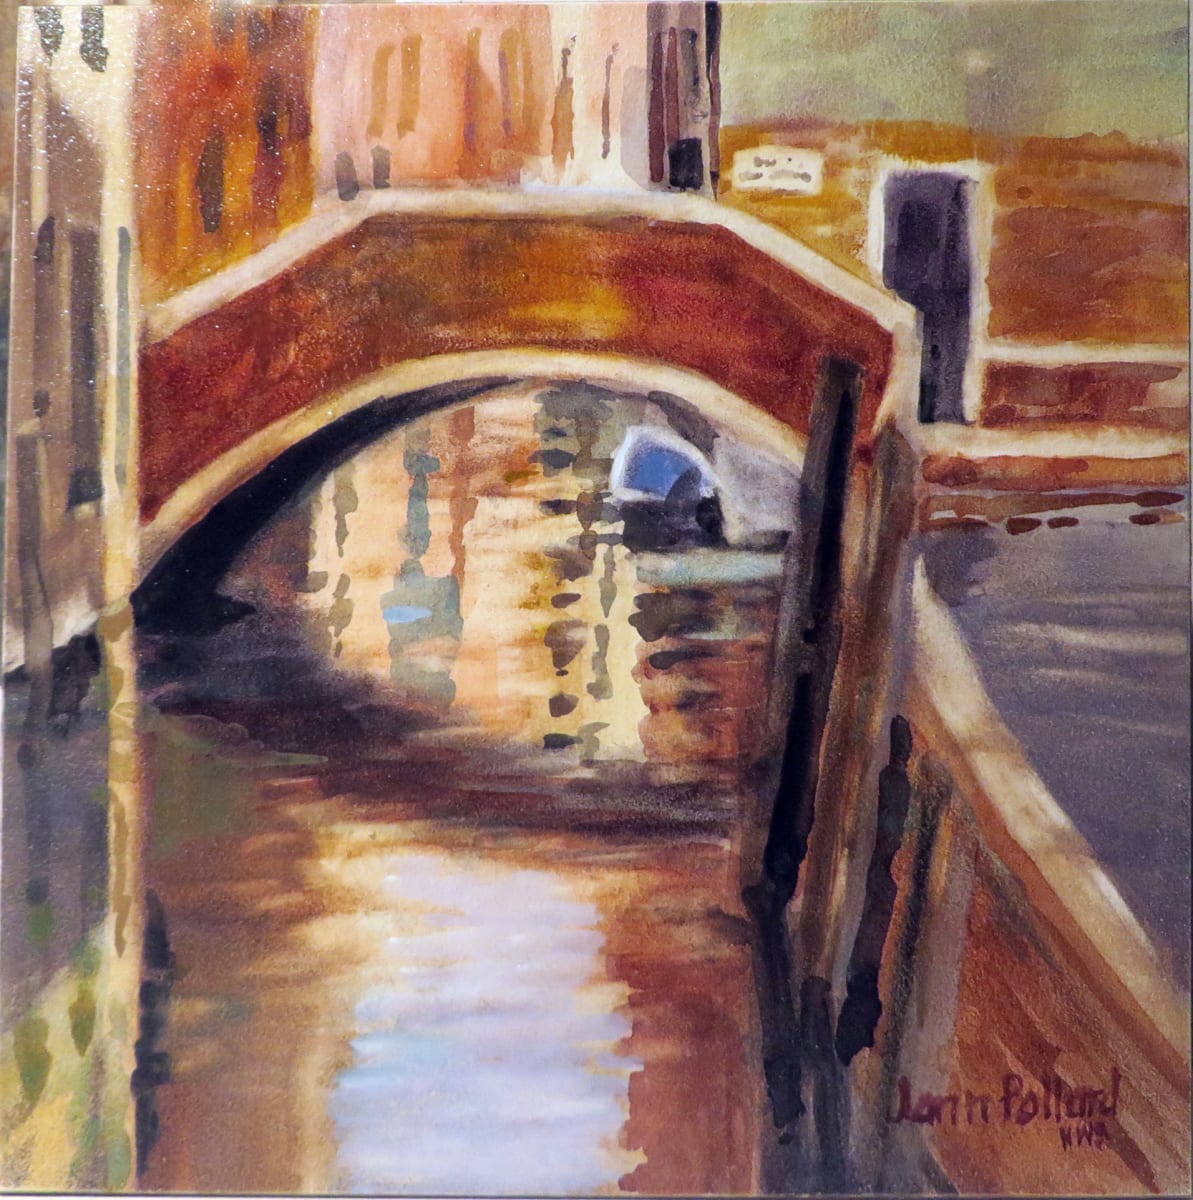 Venice Canal Reflections by Jann Lawrence Pollard  Image: Venice Canal Reflections